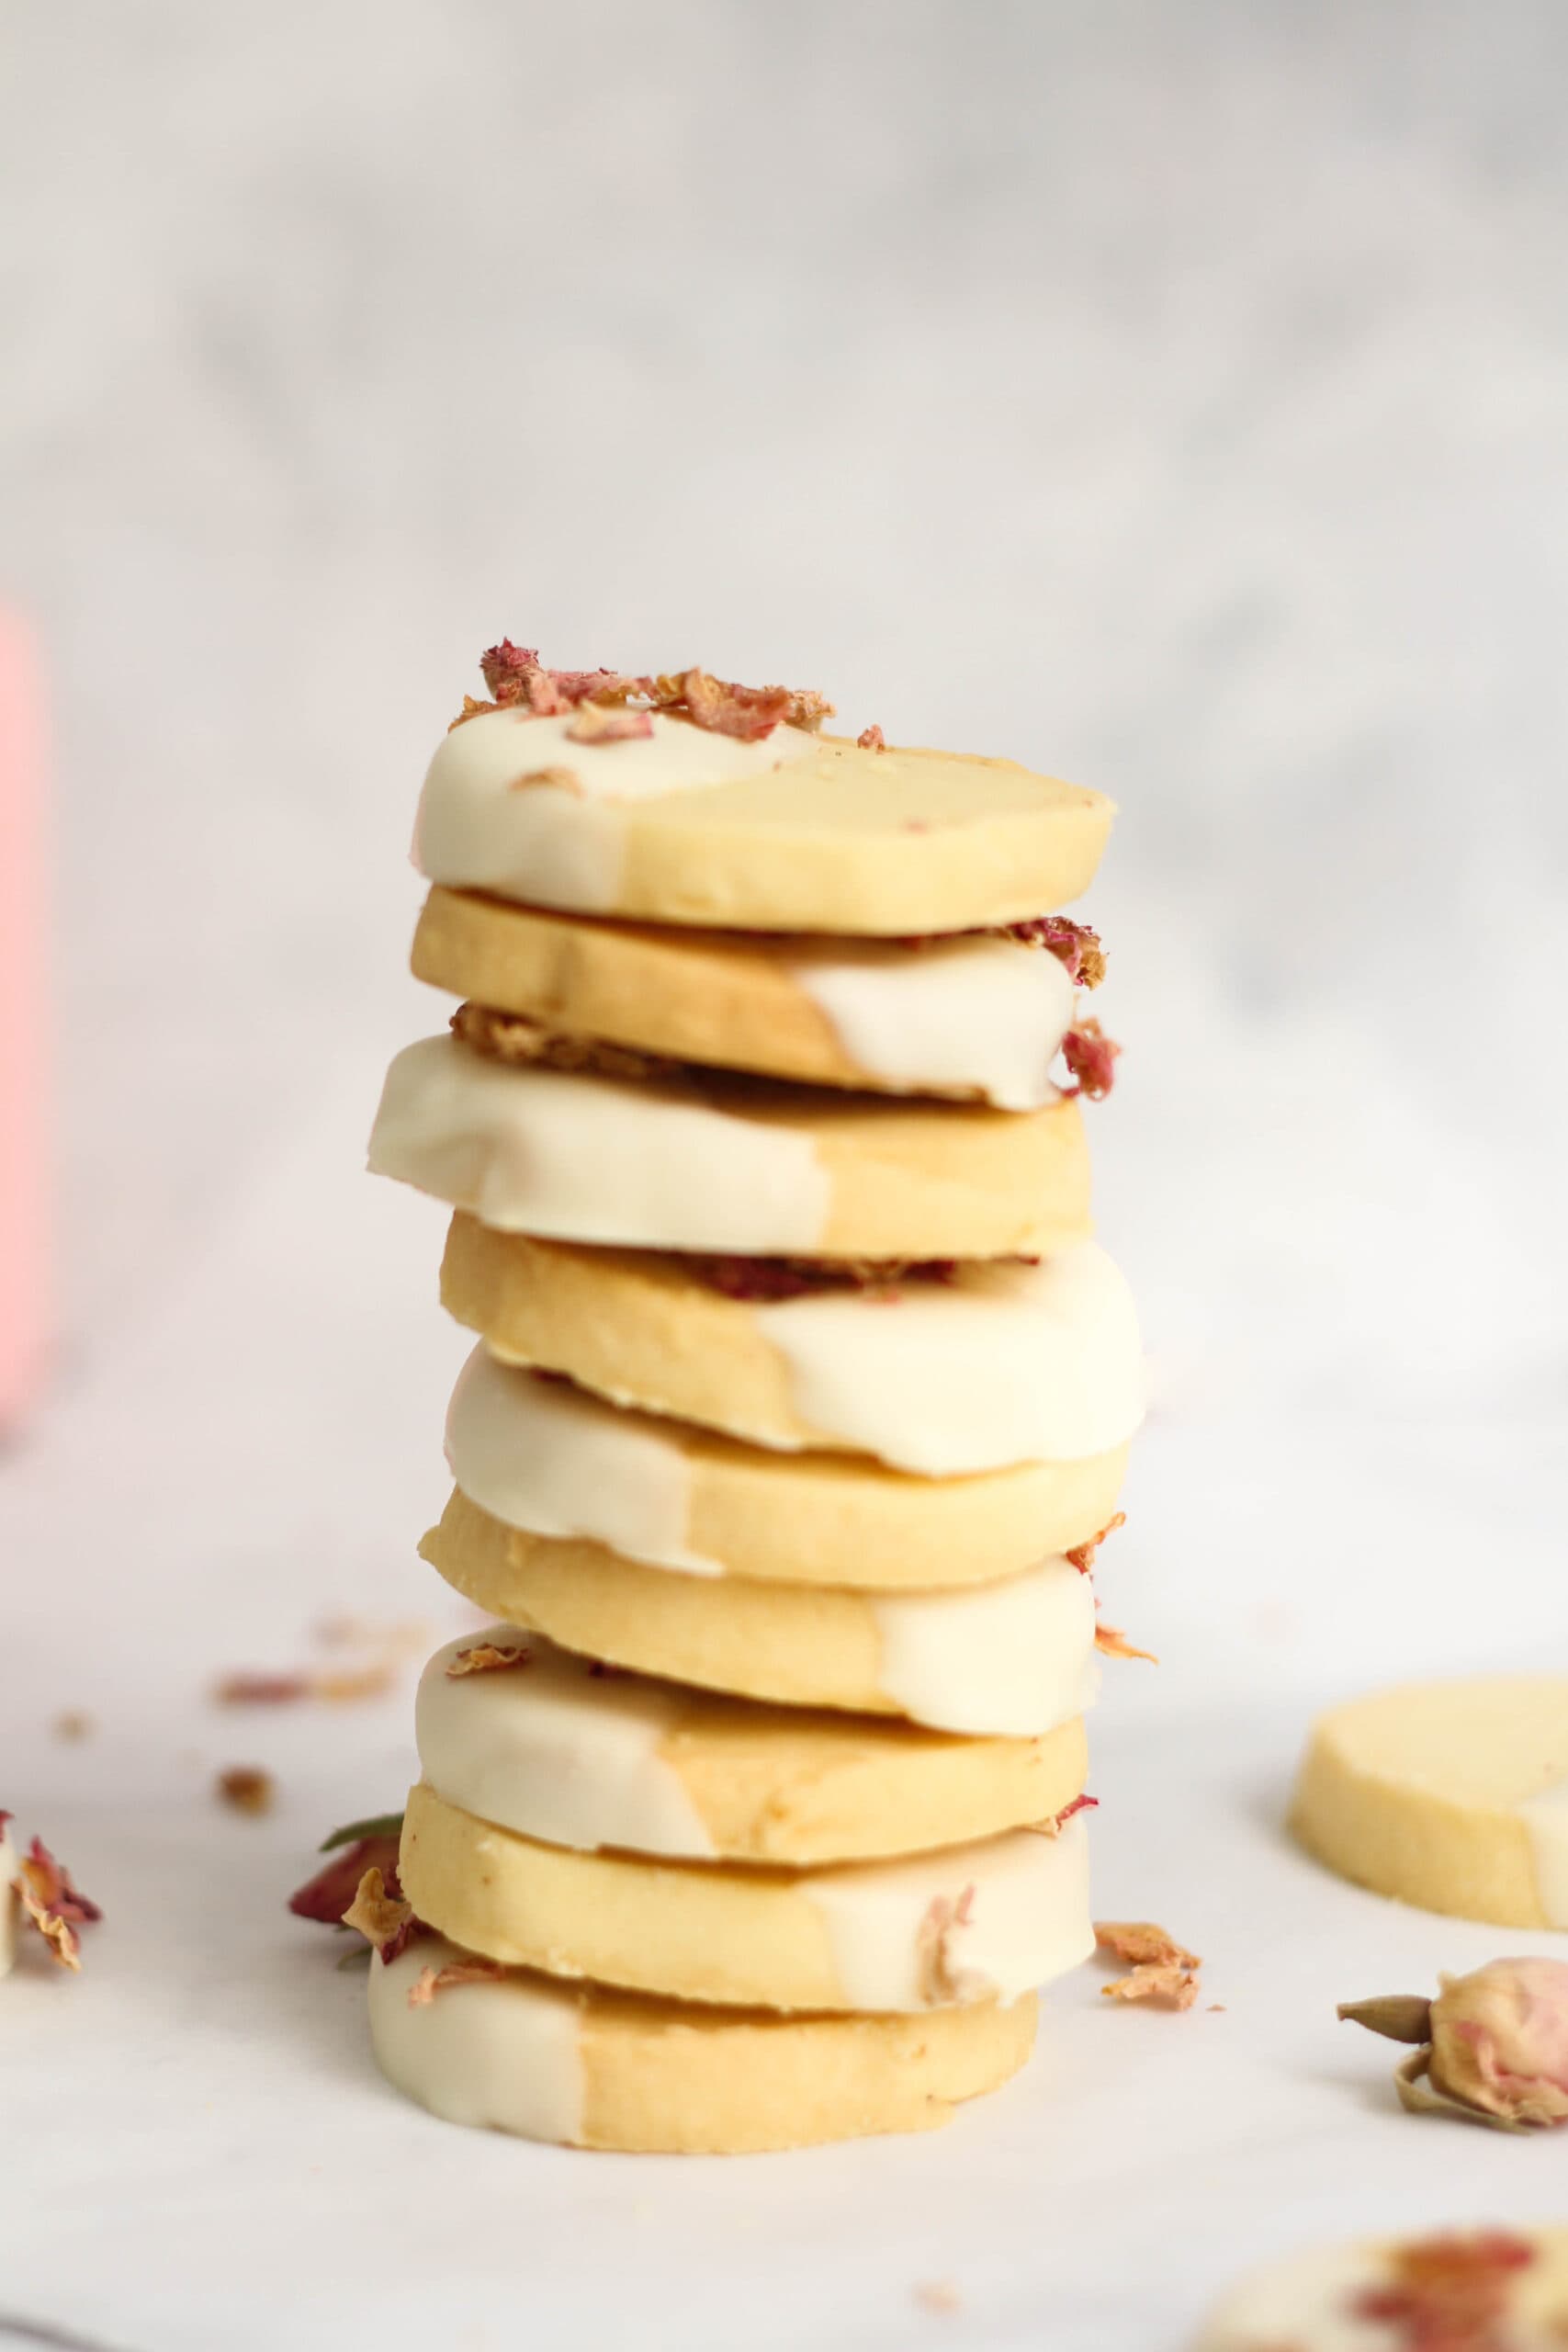 Stack of shortbread cookies, with rose petals in the background.